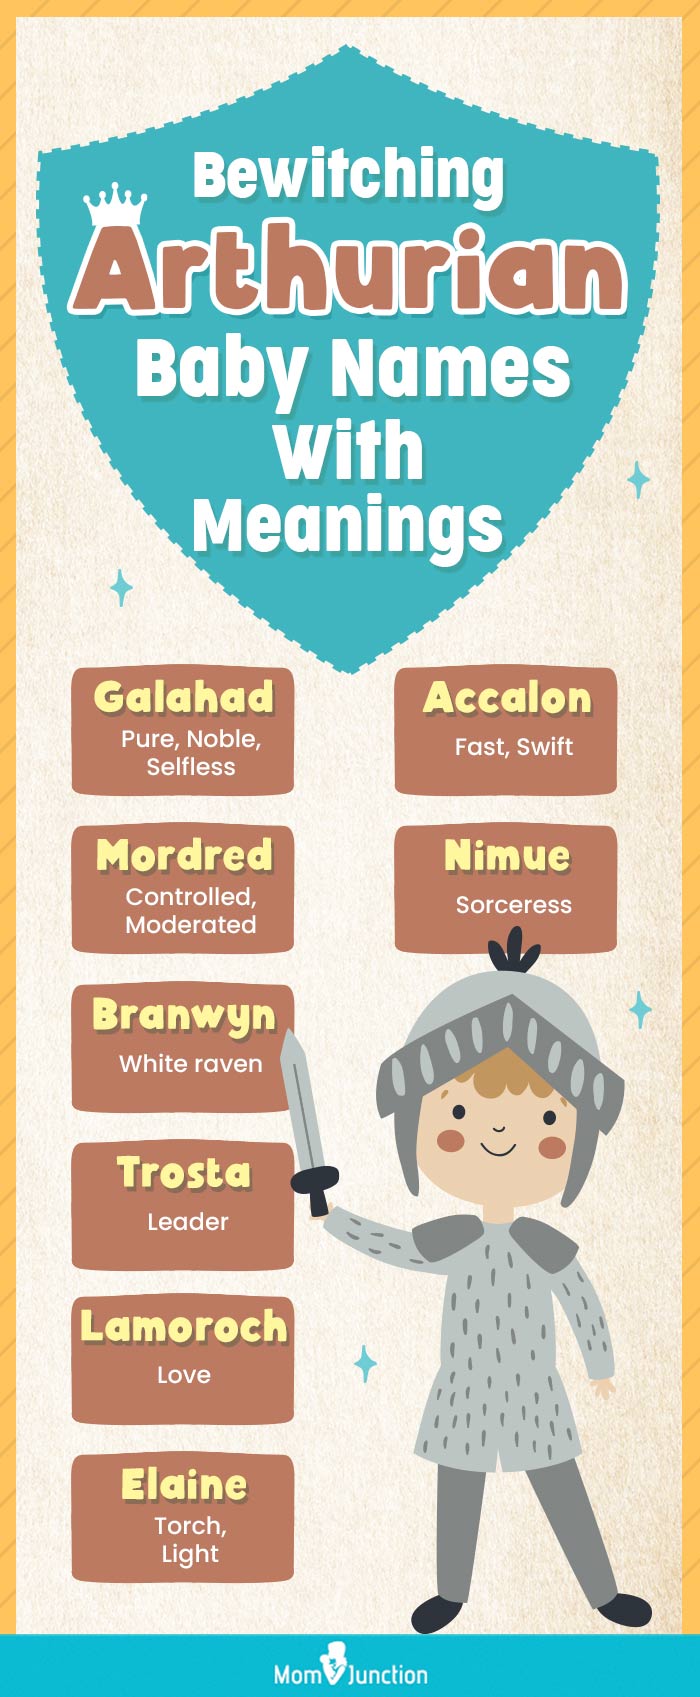 bewitching arthurian baby names with meanings (infographic)